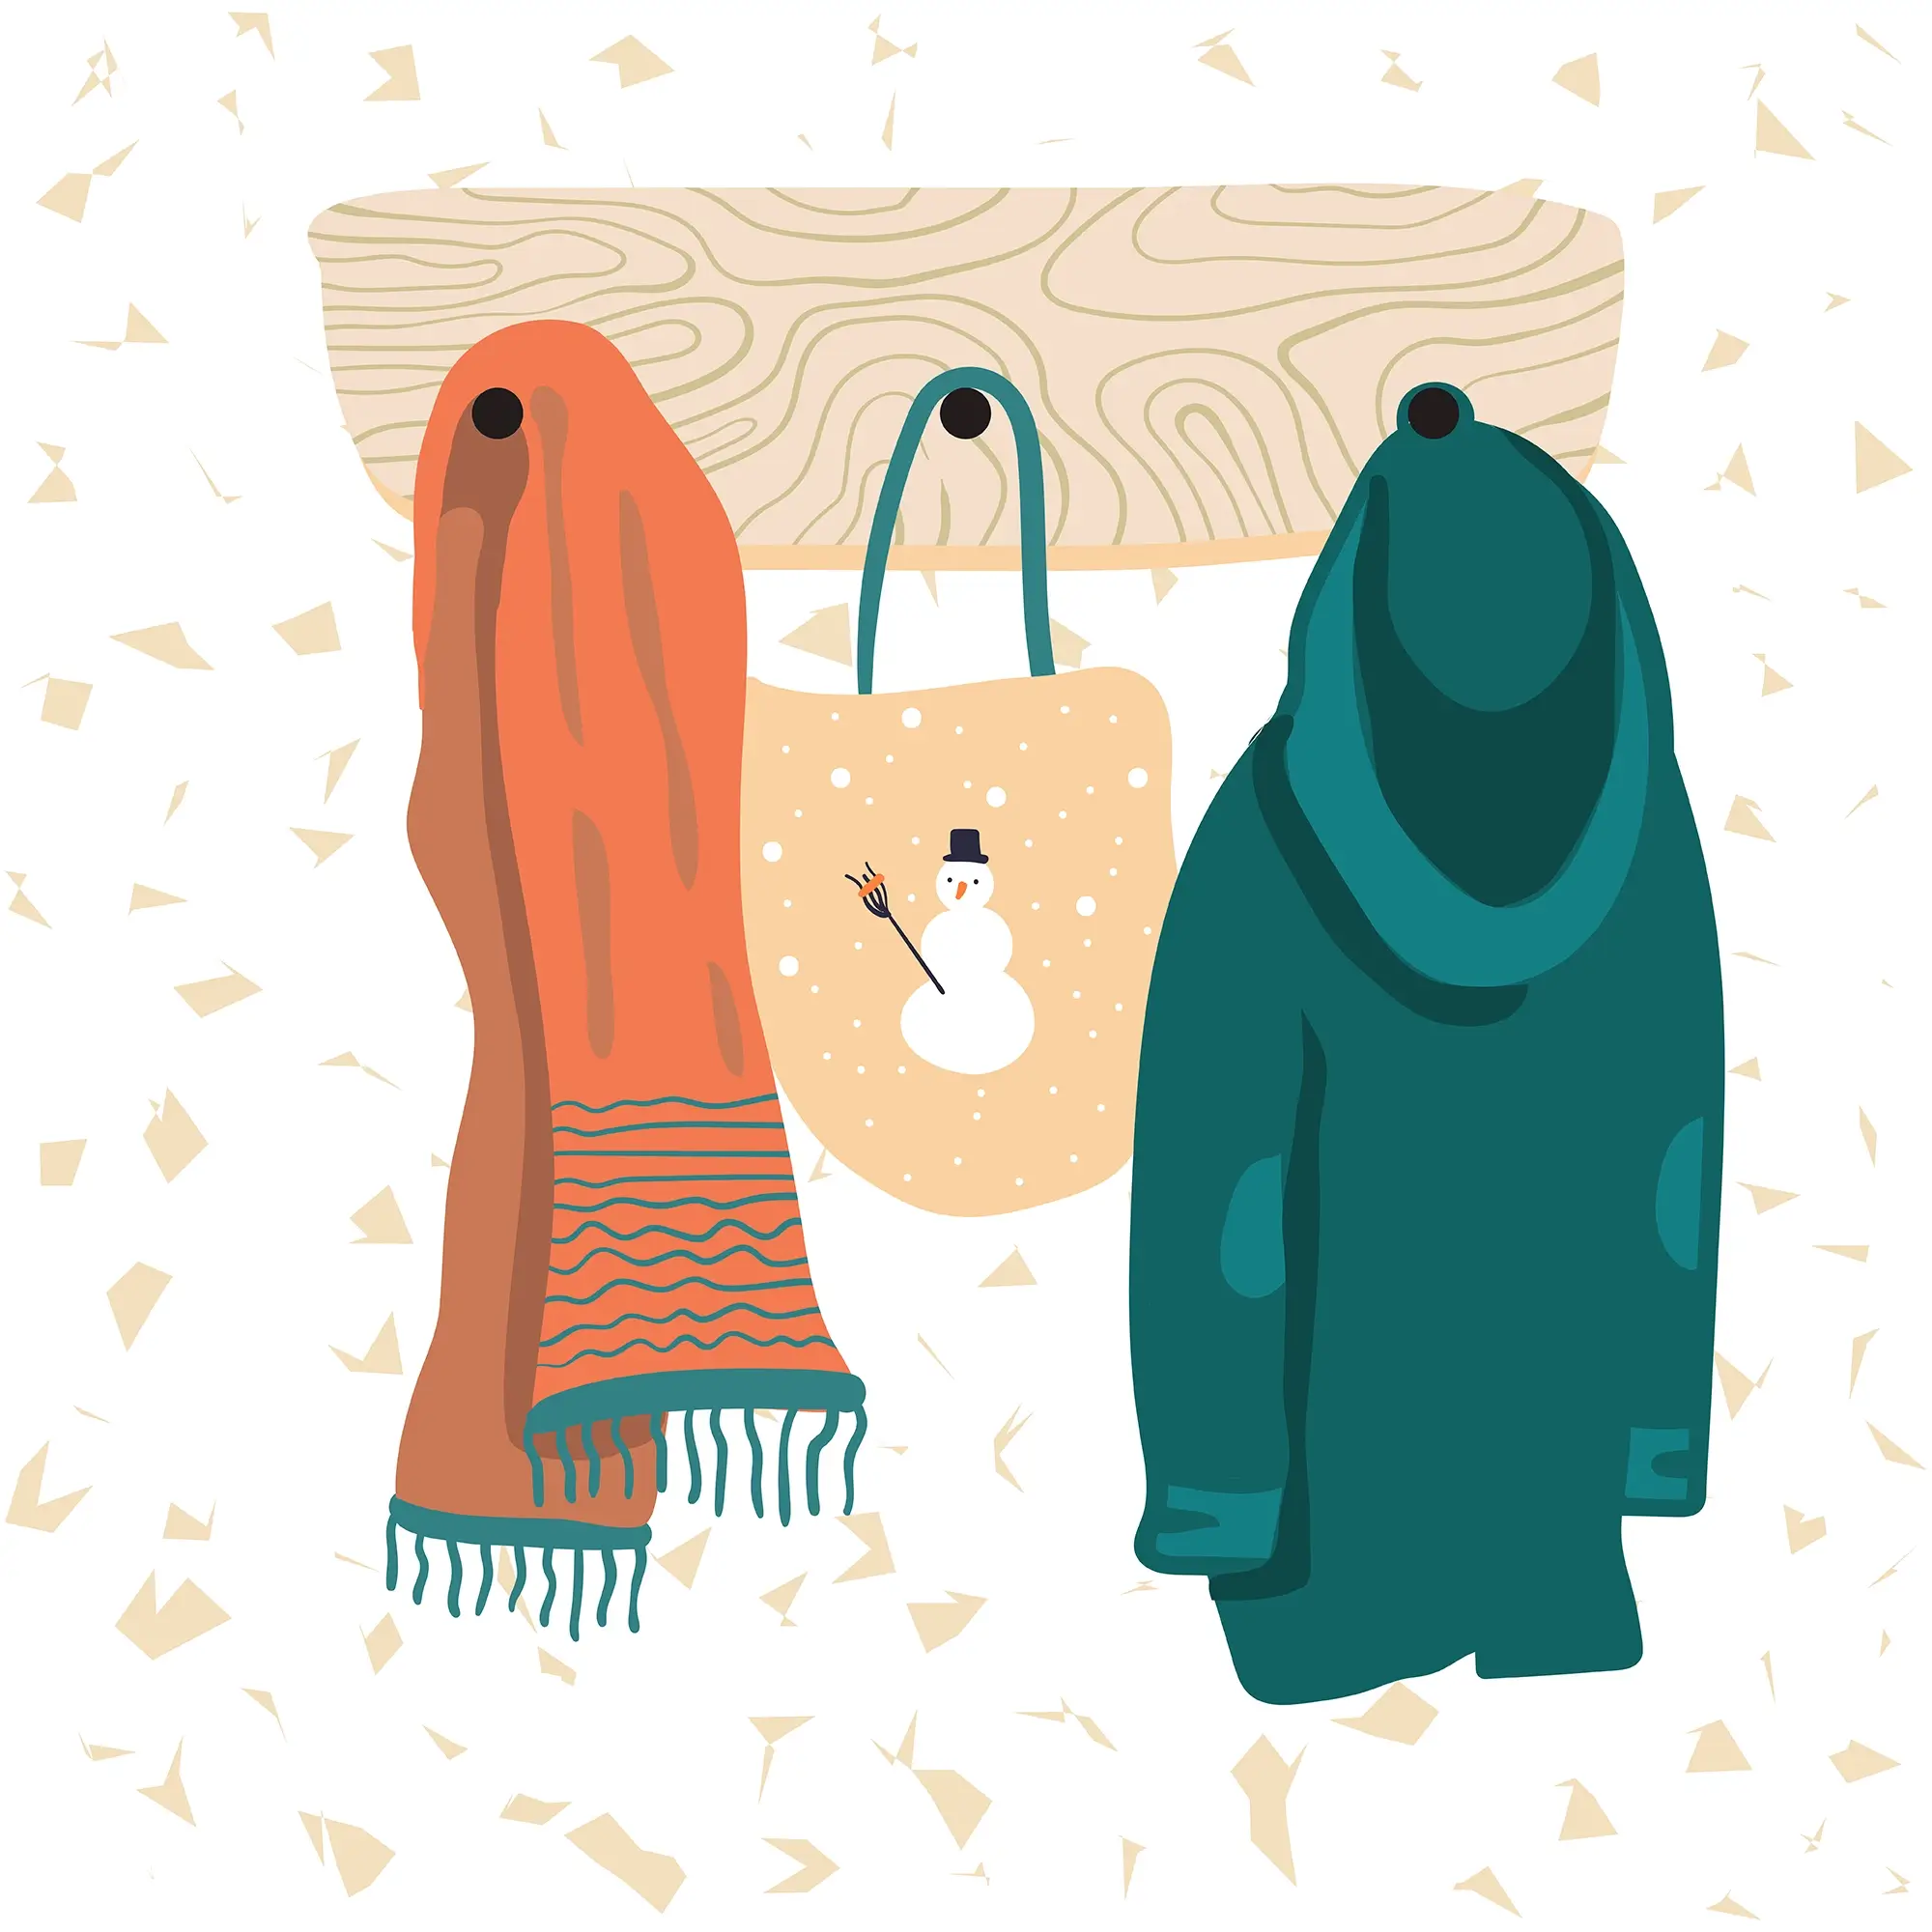 Illustration: A casually arranged bag, jacket, and scarf, each finding its place with an air of practicality. Created by Milena Stanisavljevic. Explore more at miletart.com.